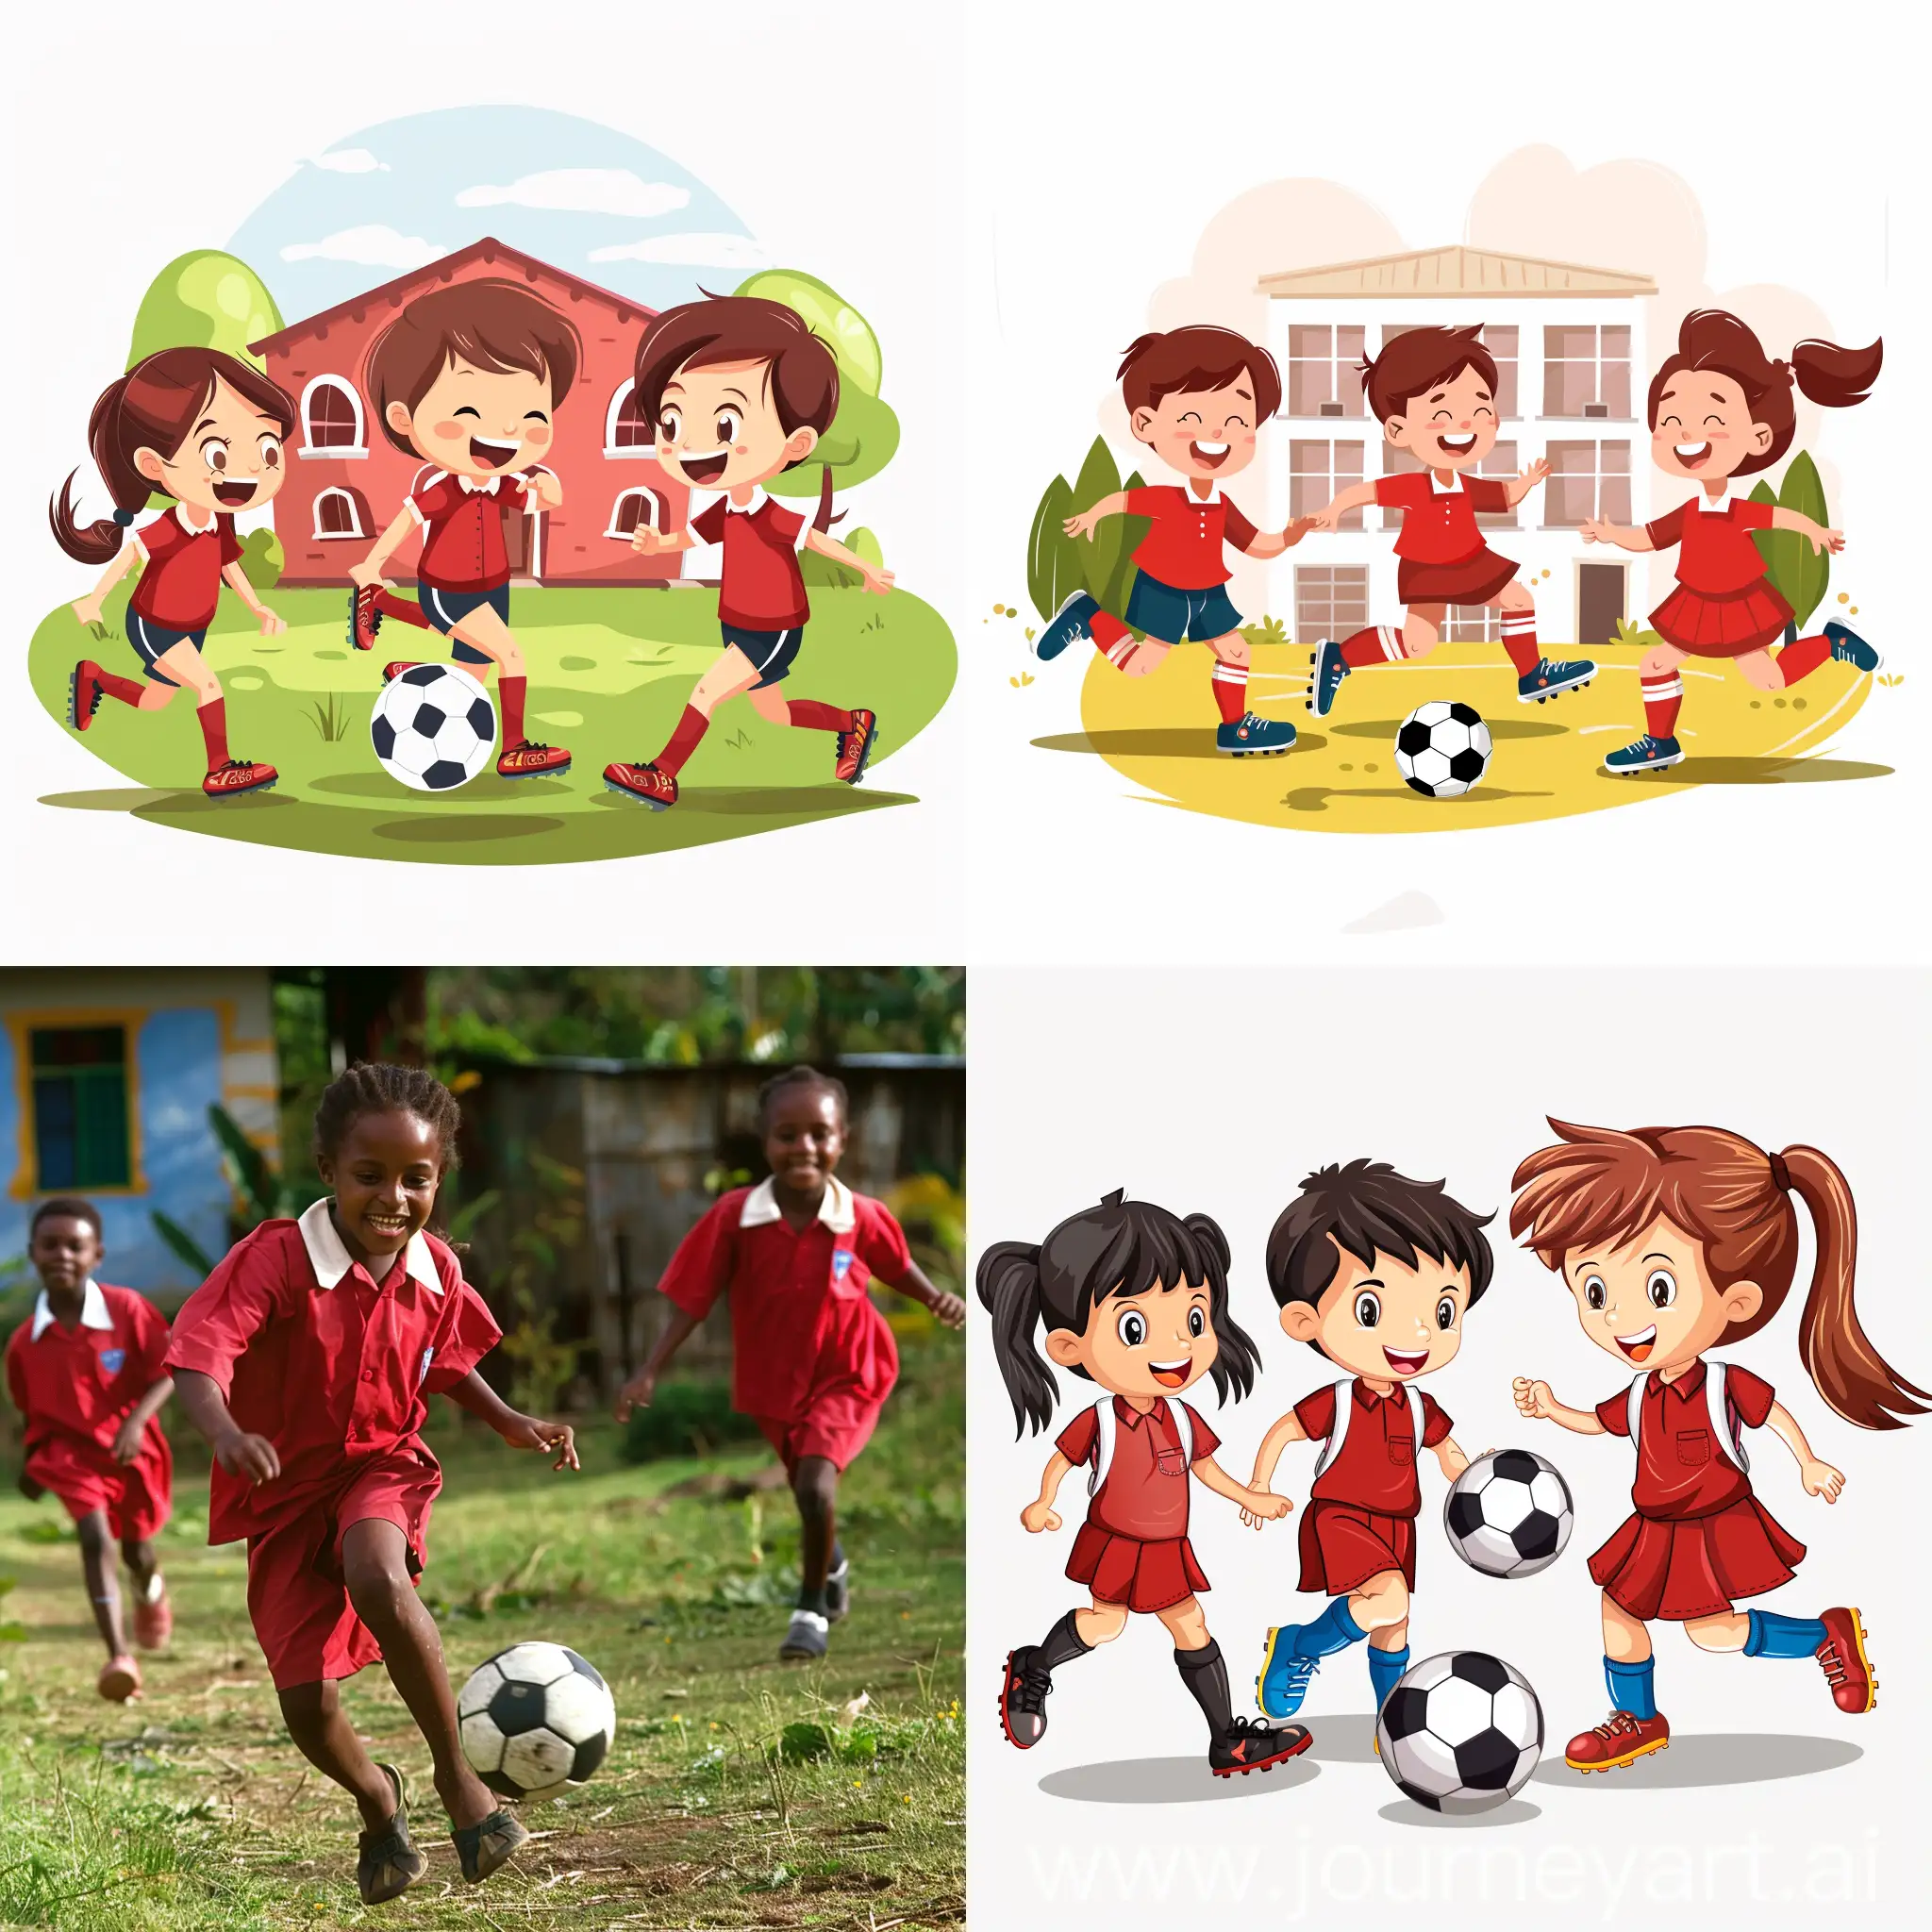 Children-Playing-Football-in-Red-School-Uniforms